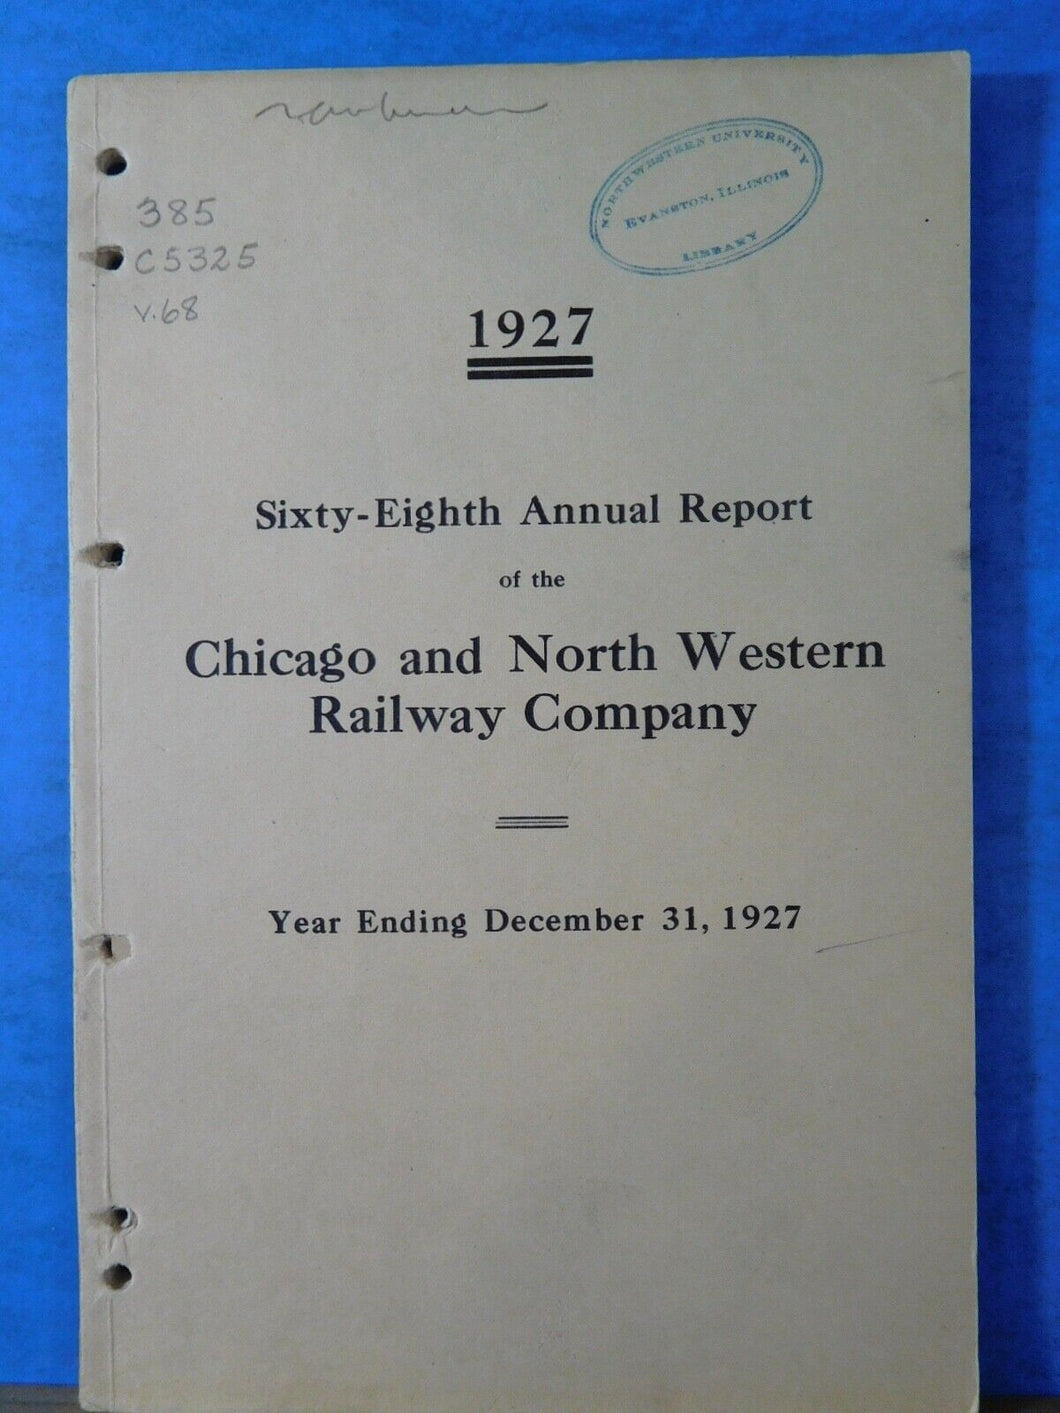 Chicago and North Western Railway Company Annual Report  1927